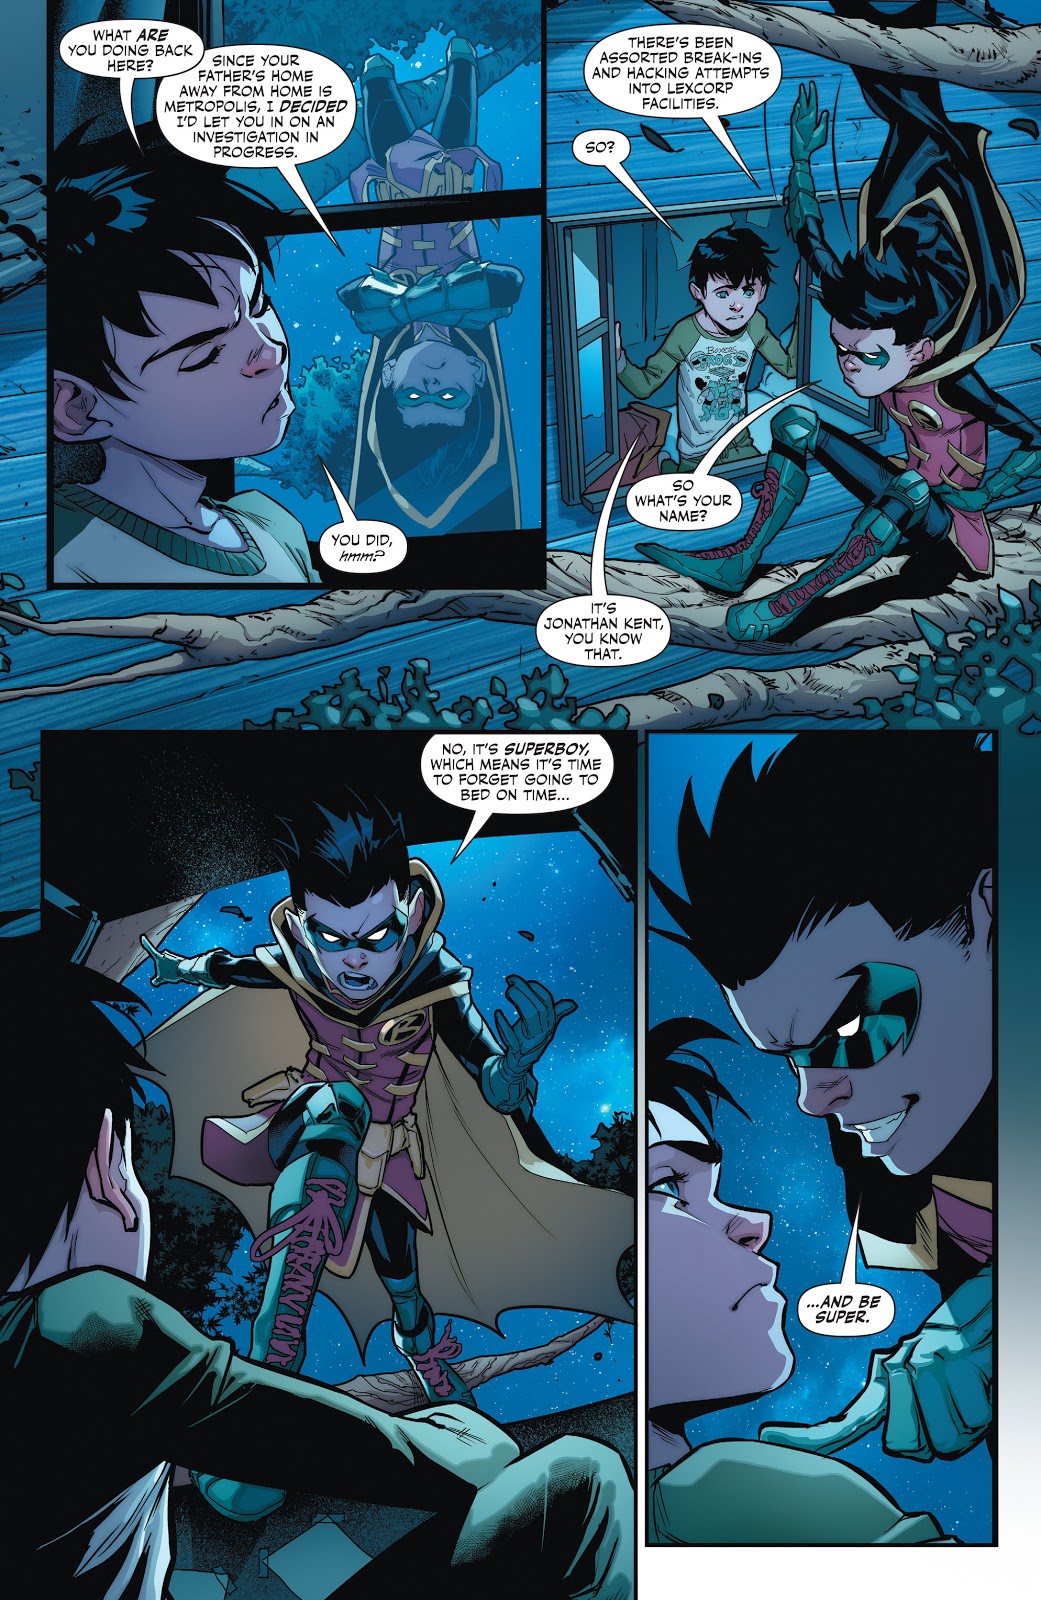 Super Sons V1 When I Grow Up review